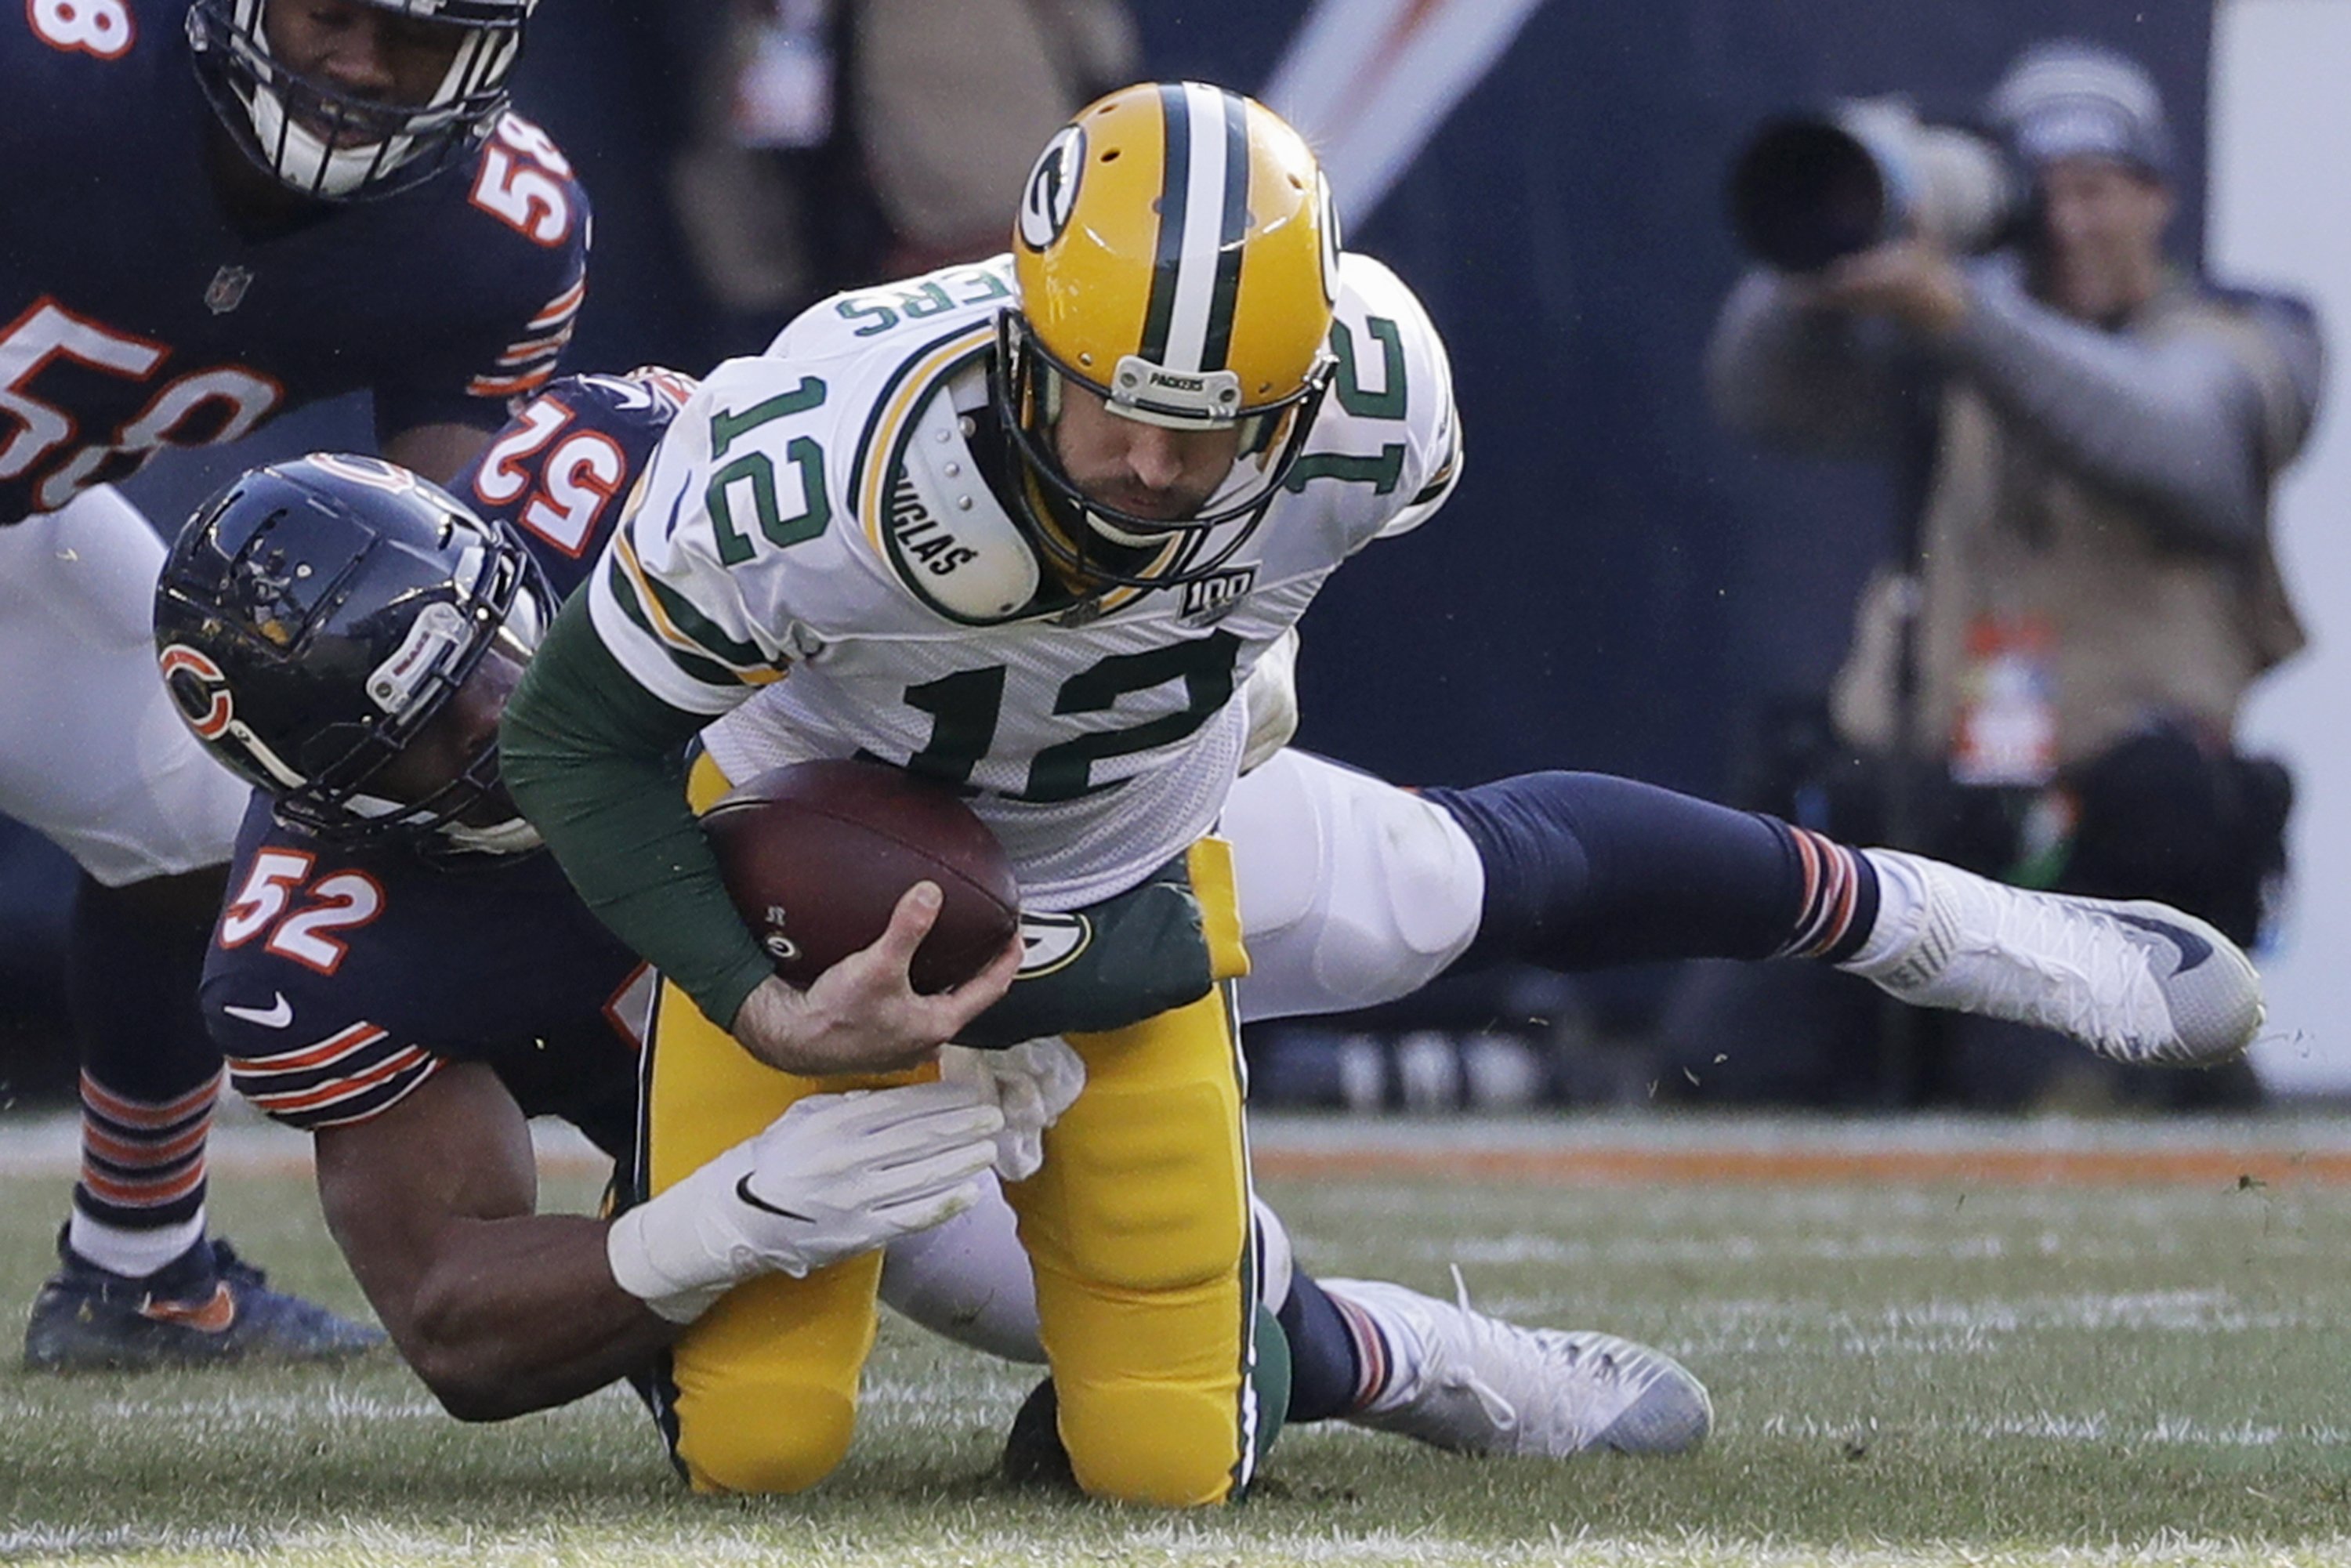 NFC NORTH PREDICTIONS: Tough Bears ‘D’ has company in NFC North but it’s not Green Bay